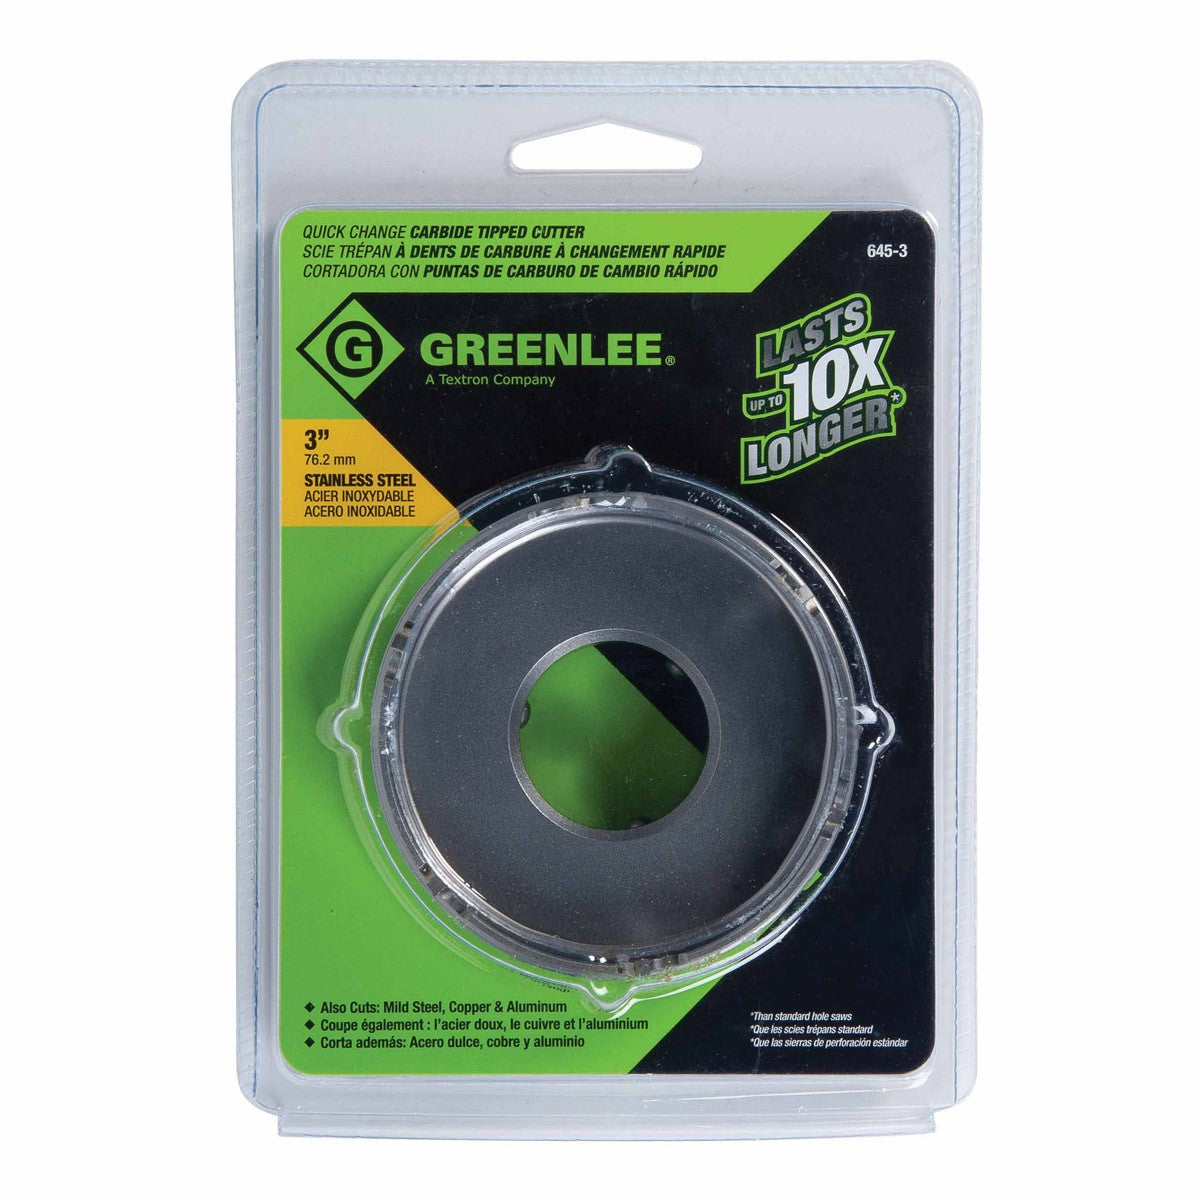 Greenlee 645-3 3"Carbide tipped Hole Cutter